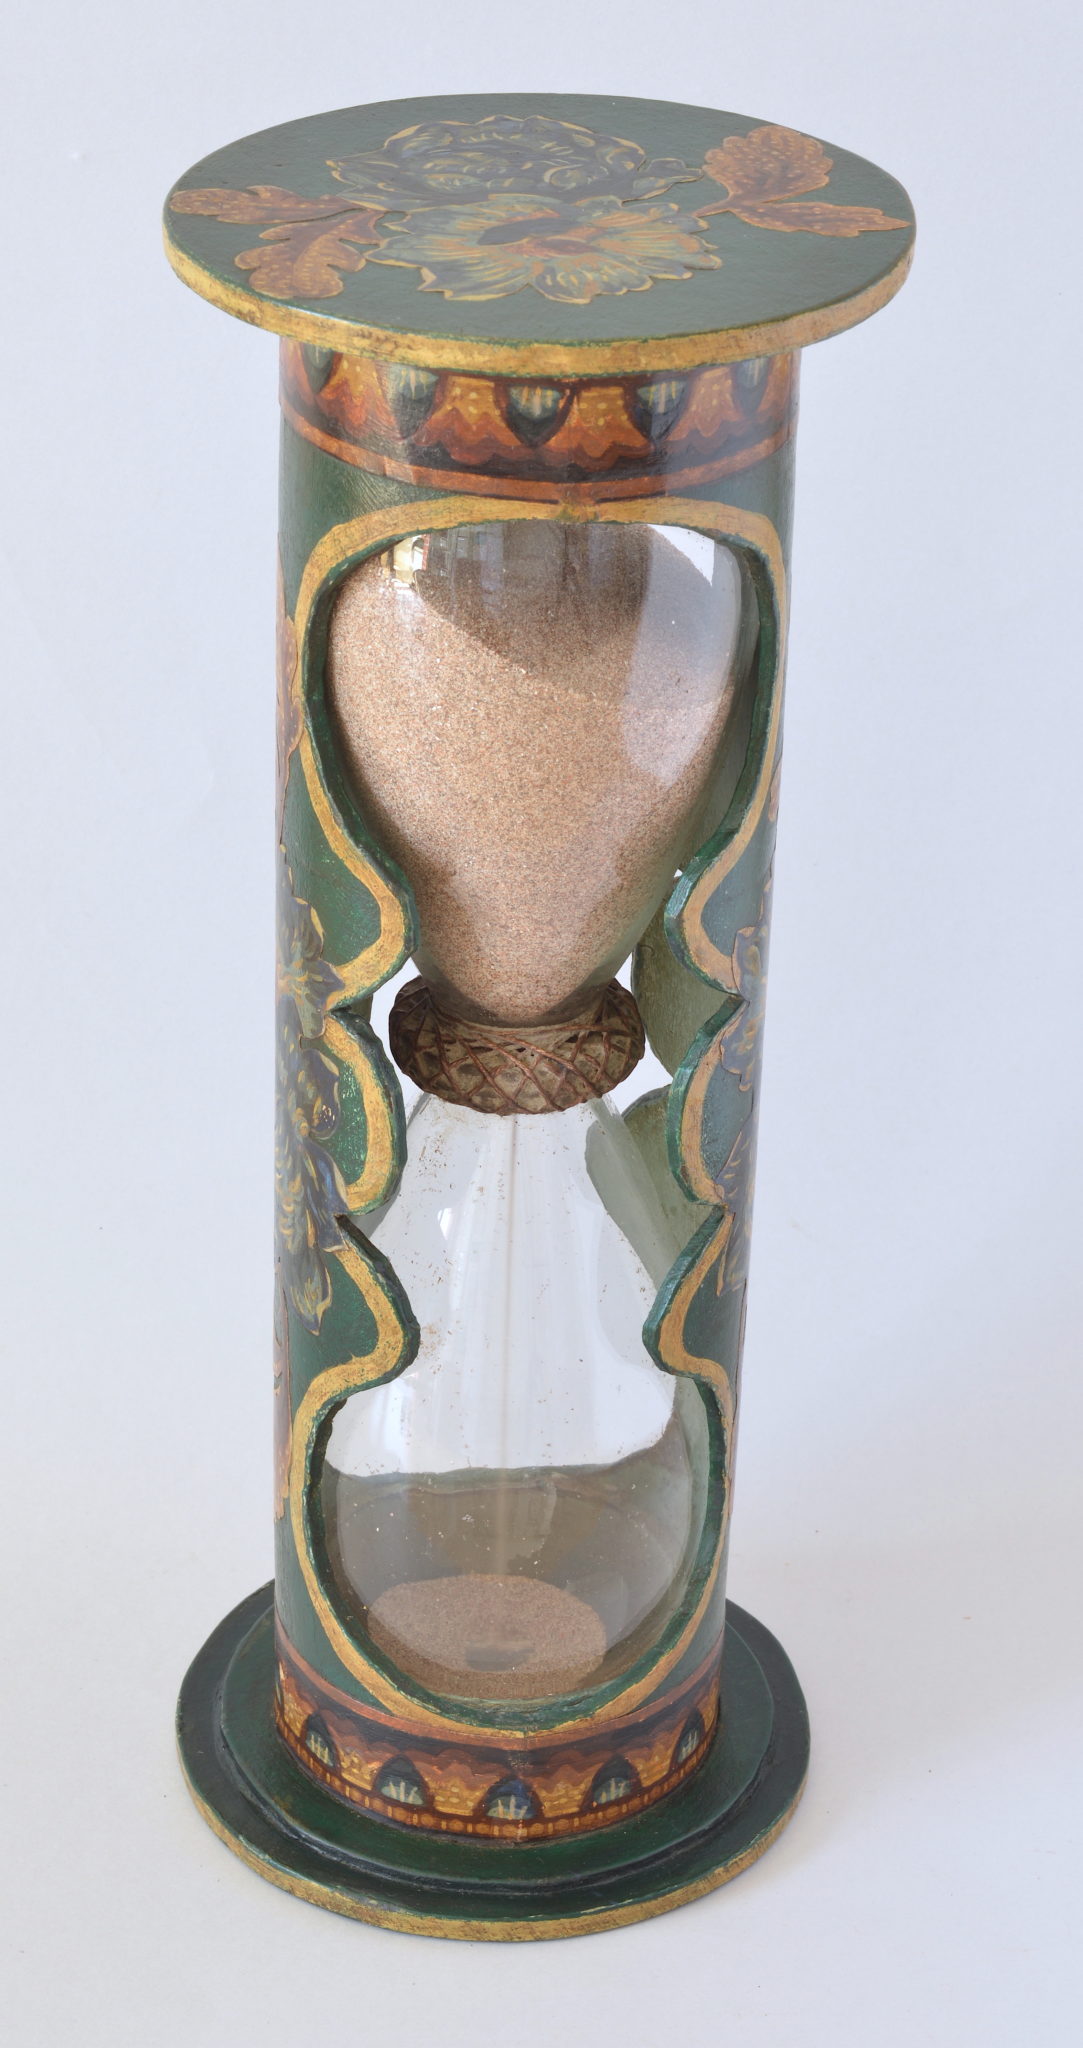 Large painted wood hourglass made in France circa 1720/1730